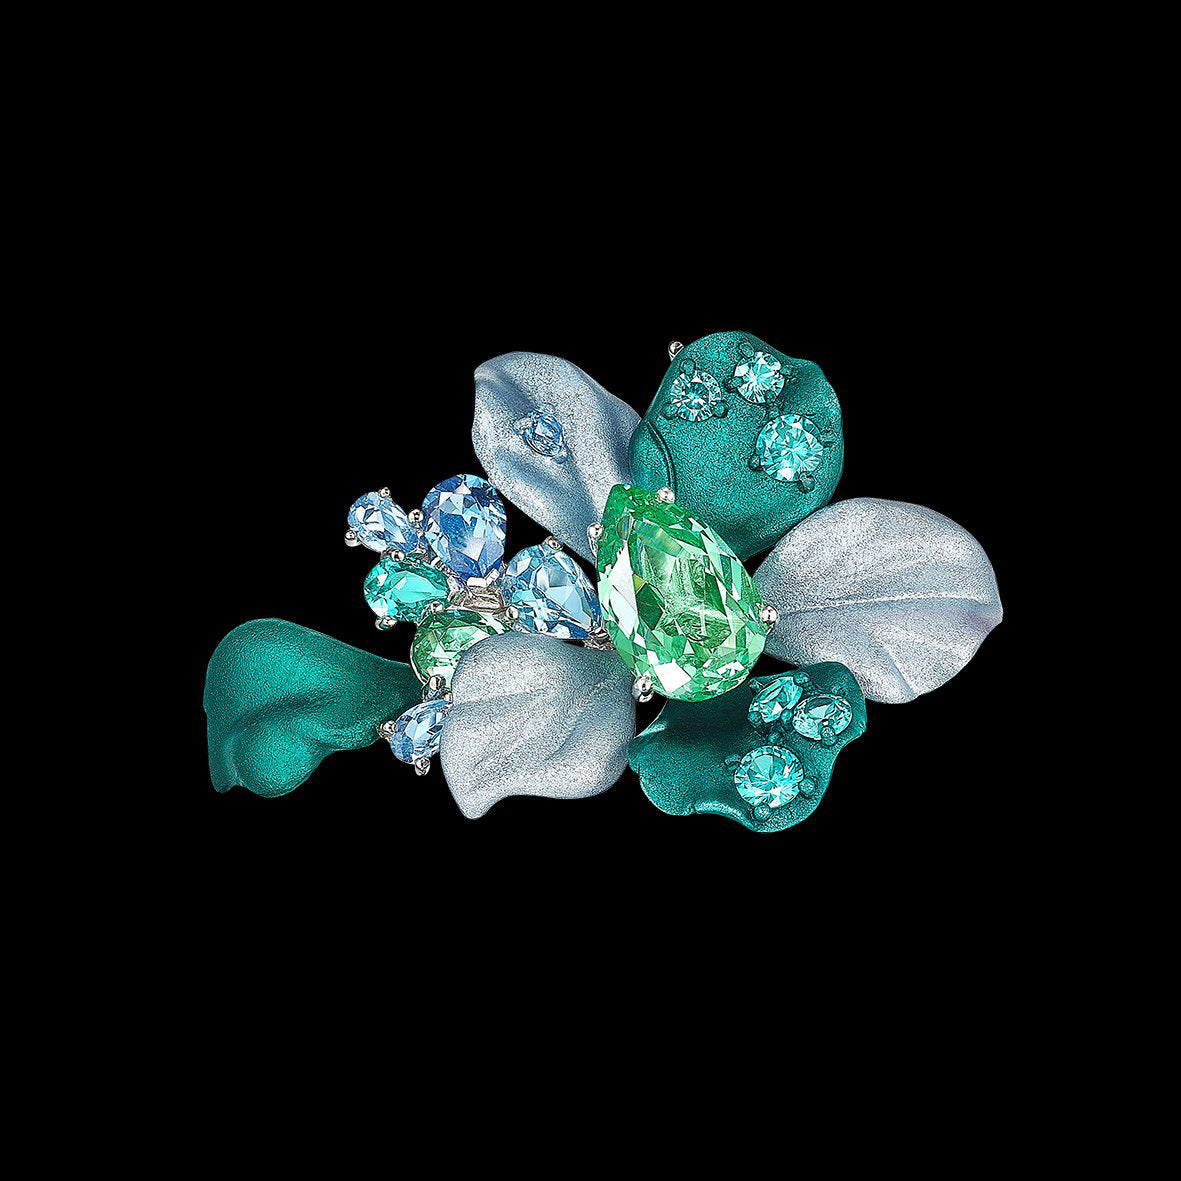 Paraiba Ariel Ring, Ring, Anabela Chan Joaillerie - Fine jewelry with laboratory grown and created gemstones hand-crafted in the United Kingdom. Anabela Chan Joaillerie is the first fine jewellery brand in the world to champion laboratory-grown and created gemstones with high jewellery design, artisanal craftsmanship and a focus on ethical and sustainable innovations.